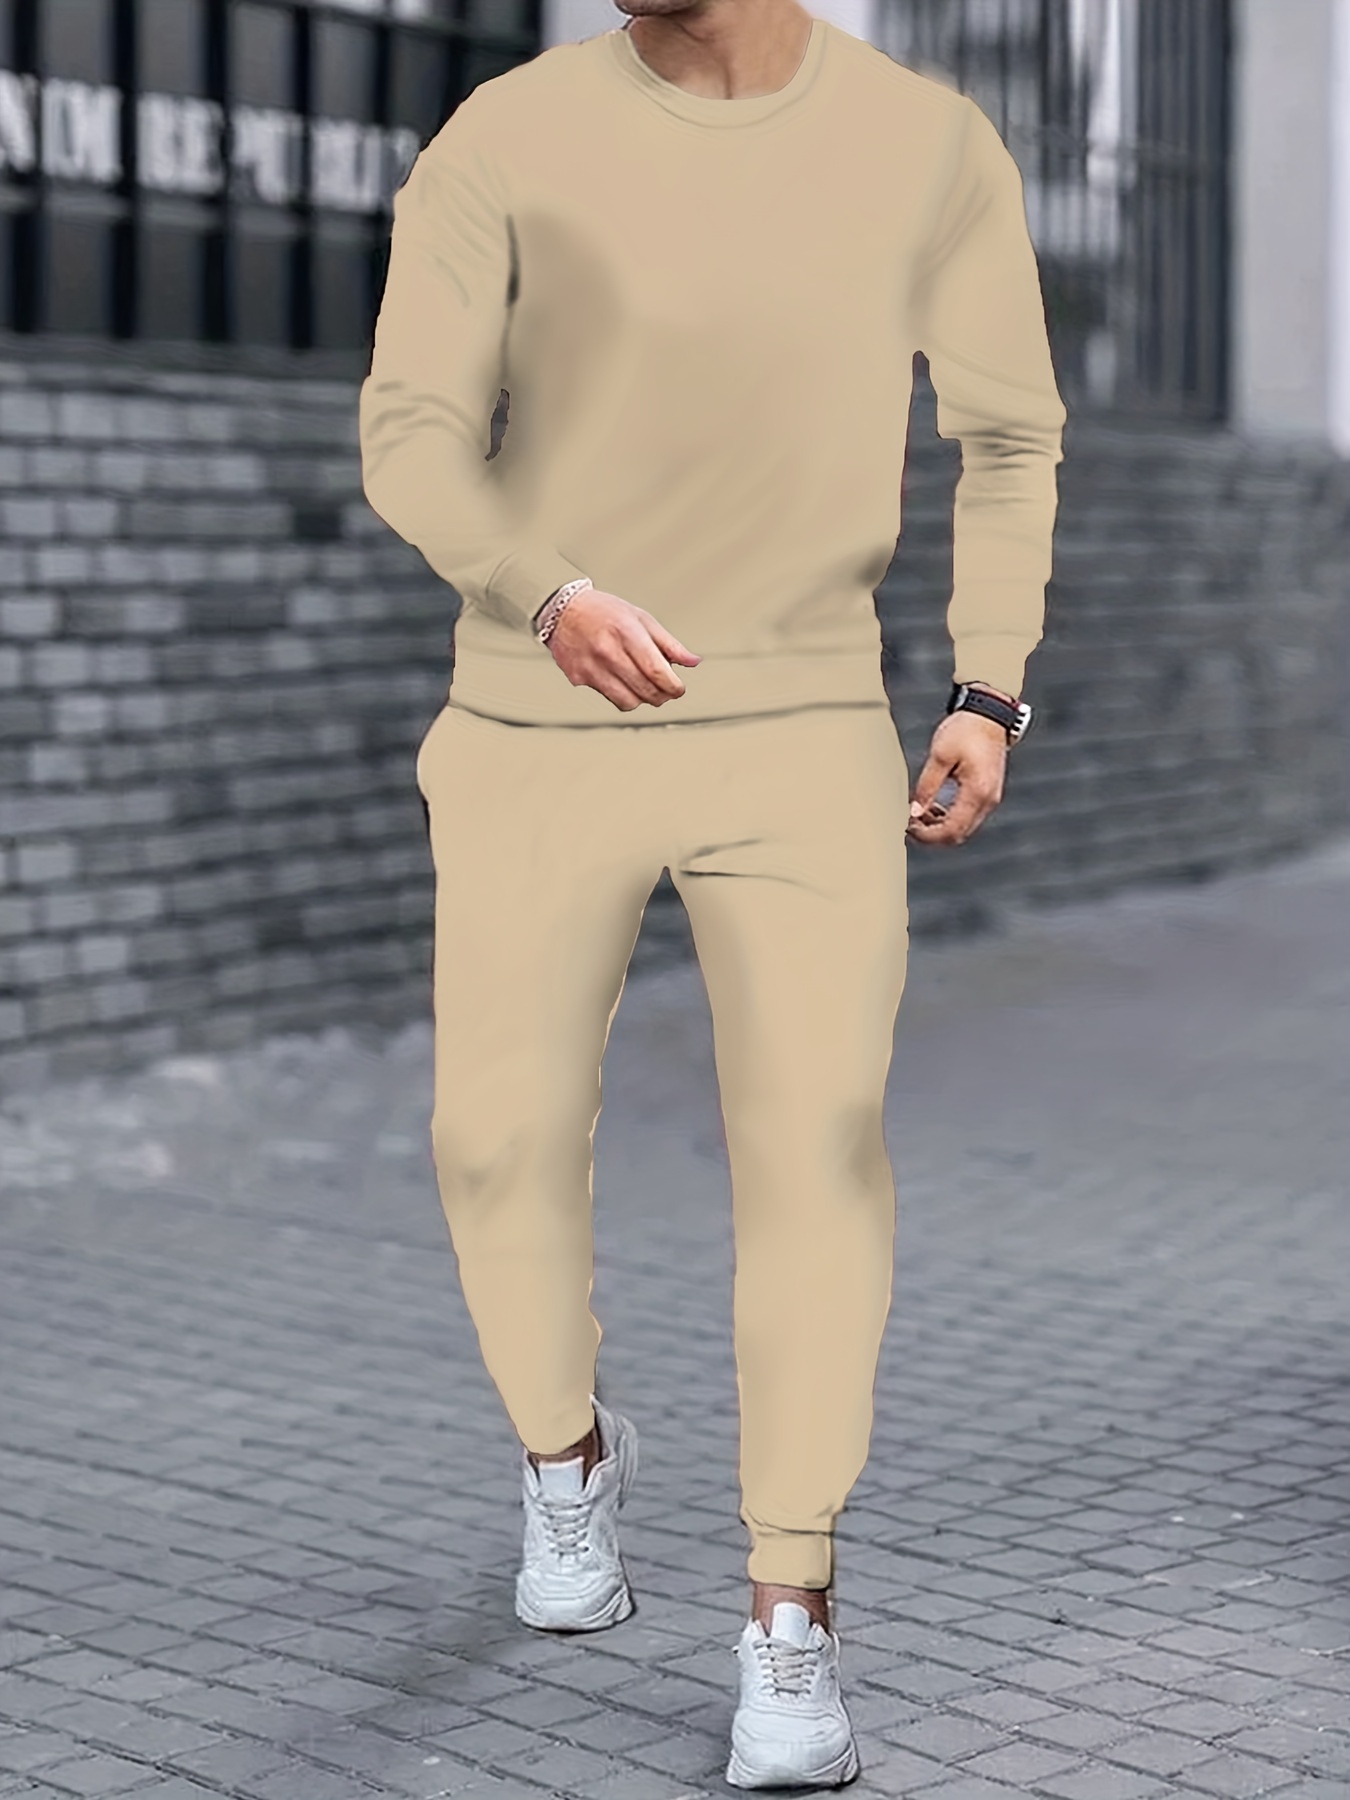 Best Thermal Wear For Men Costume. Face Swap. Insert Your Face ID:1130020